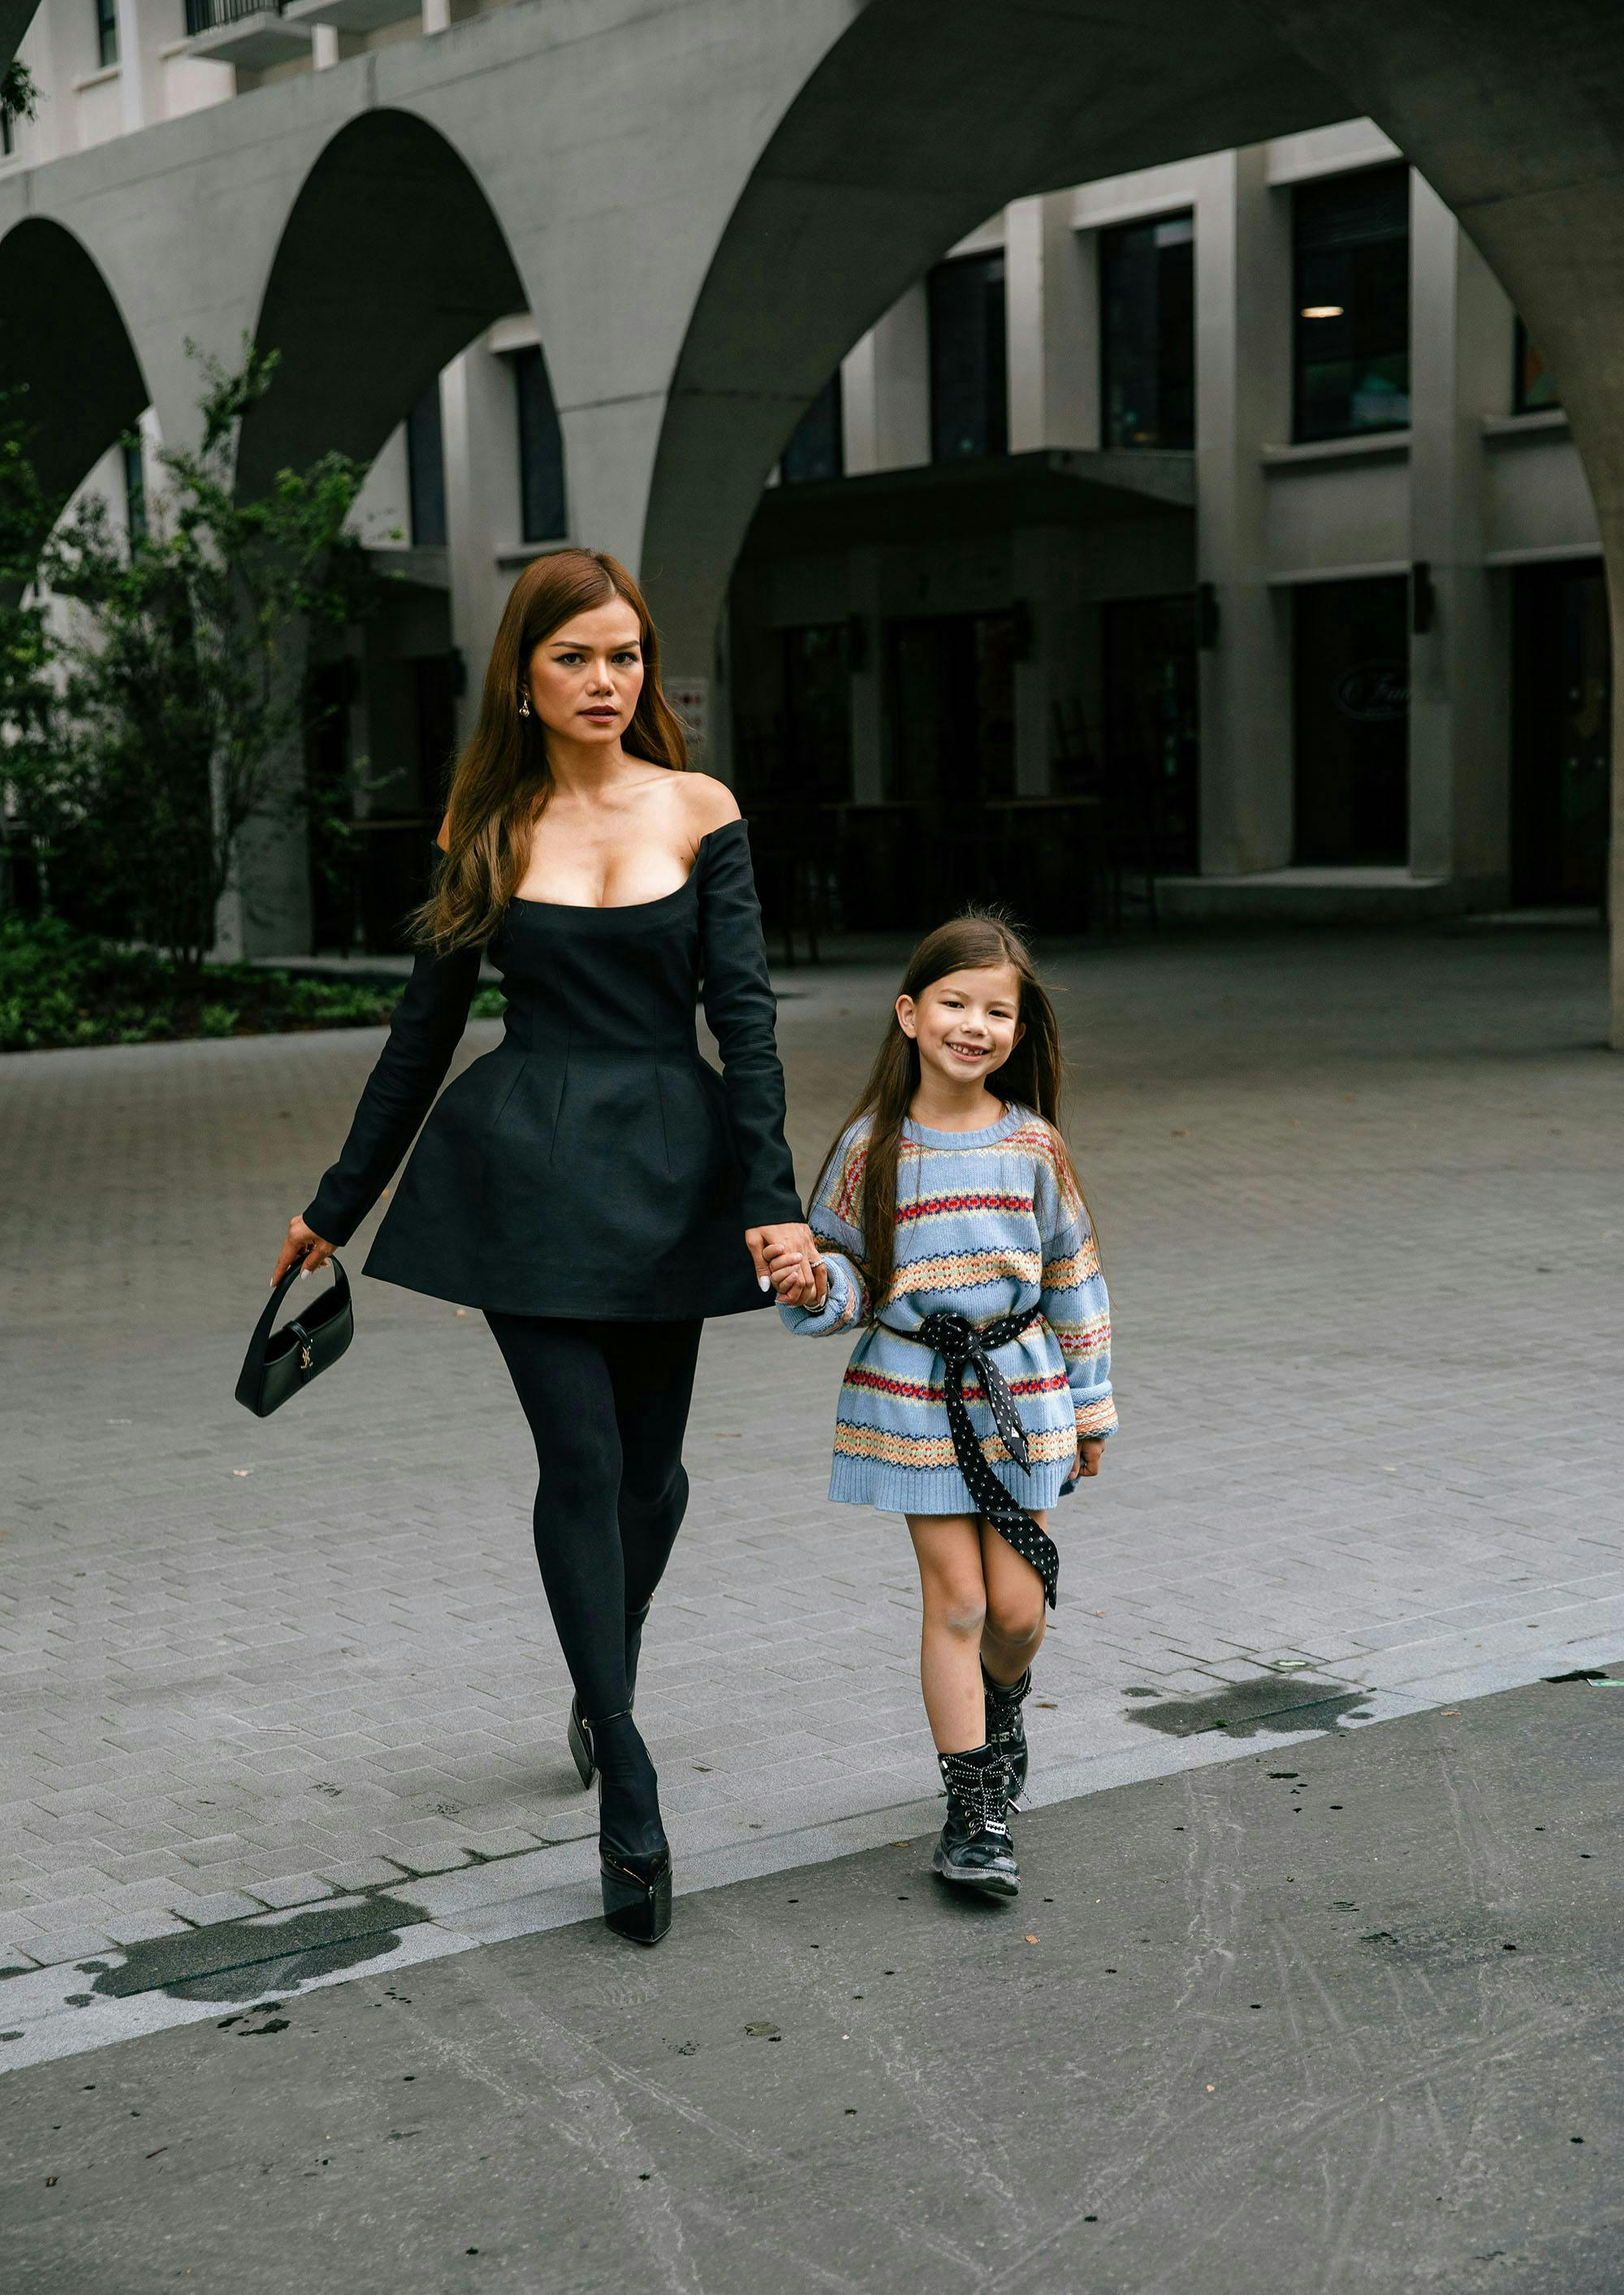 Woman in black dress walking with child